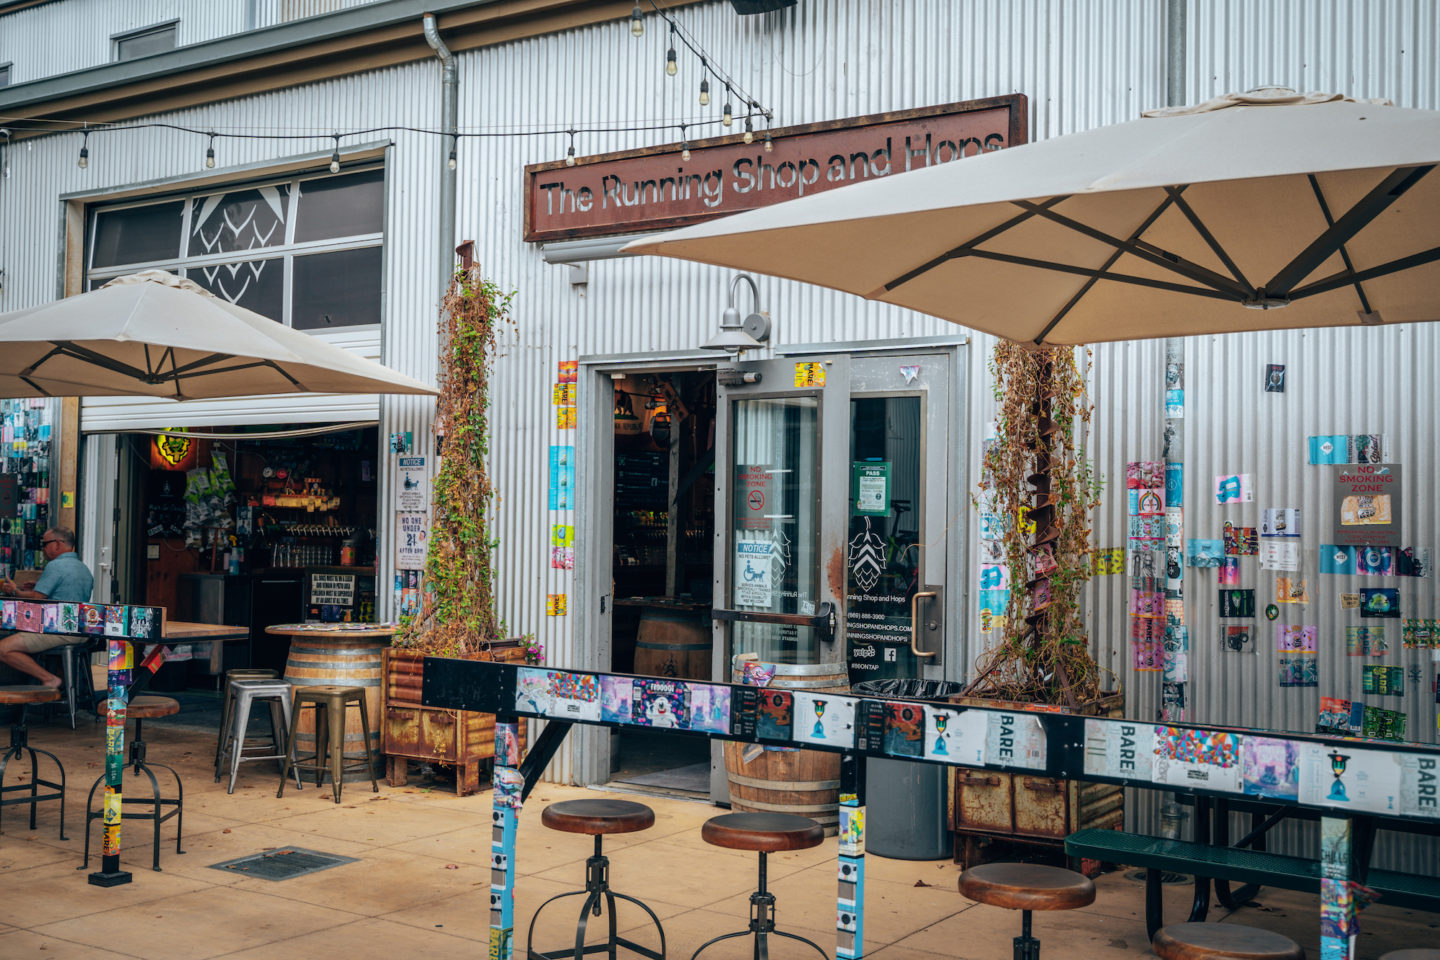 The Running Shop and Hops - Downtown Morgan Hill